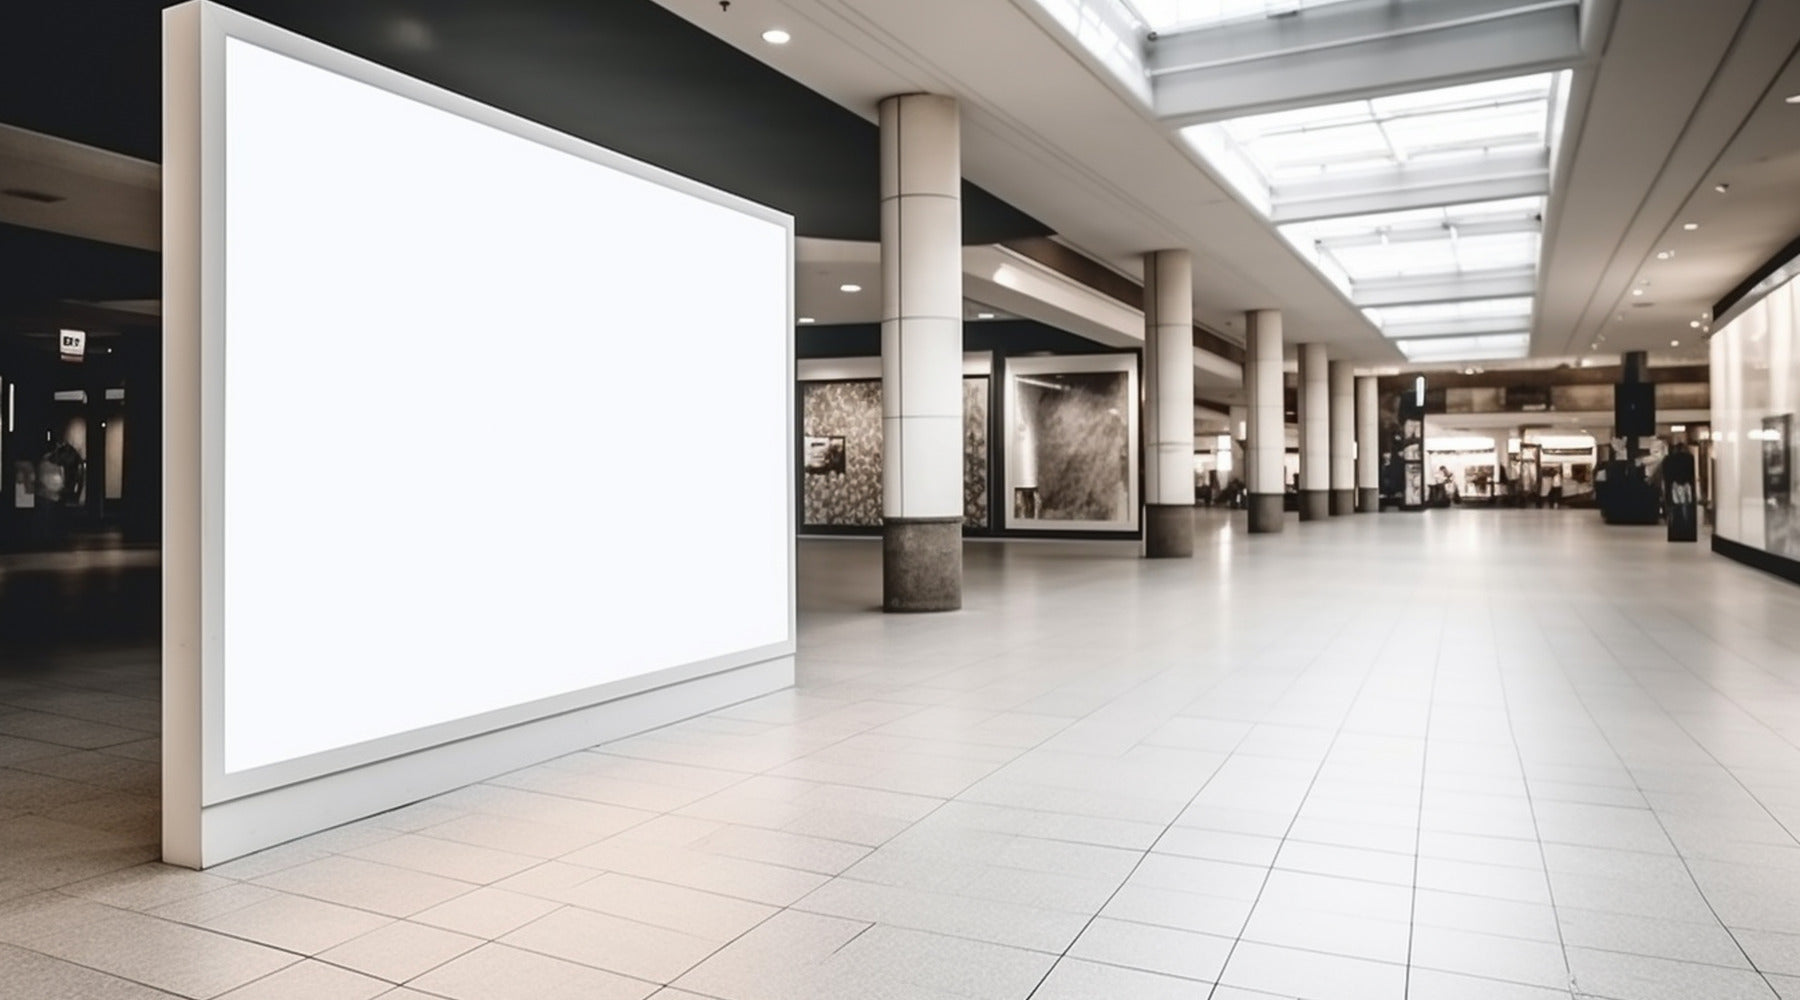 LED CFL retrofit lamps used in commercial recessed lights throughout shopping mall